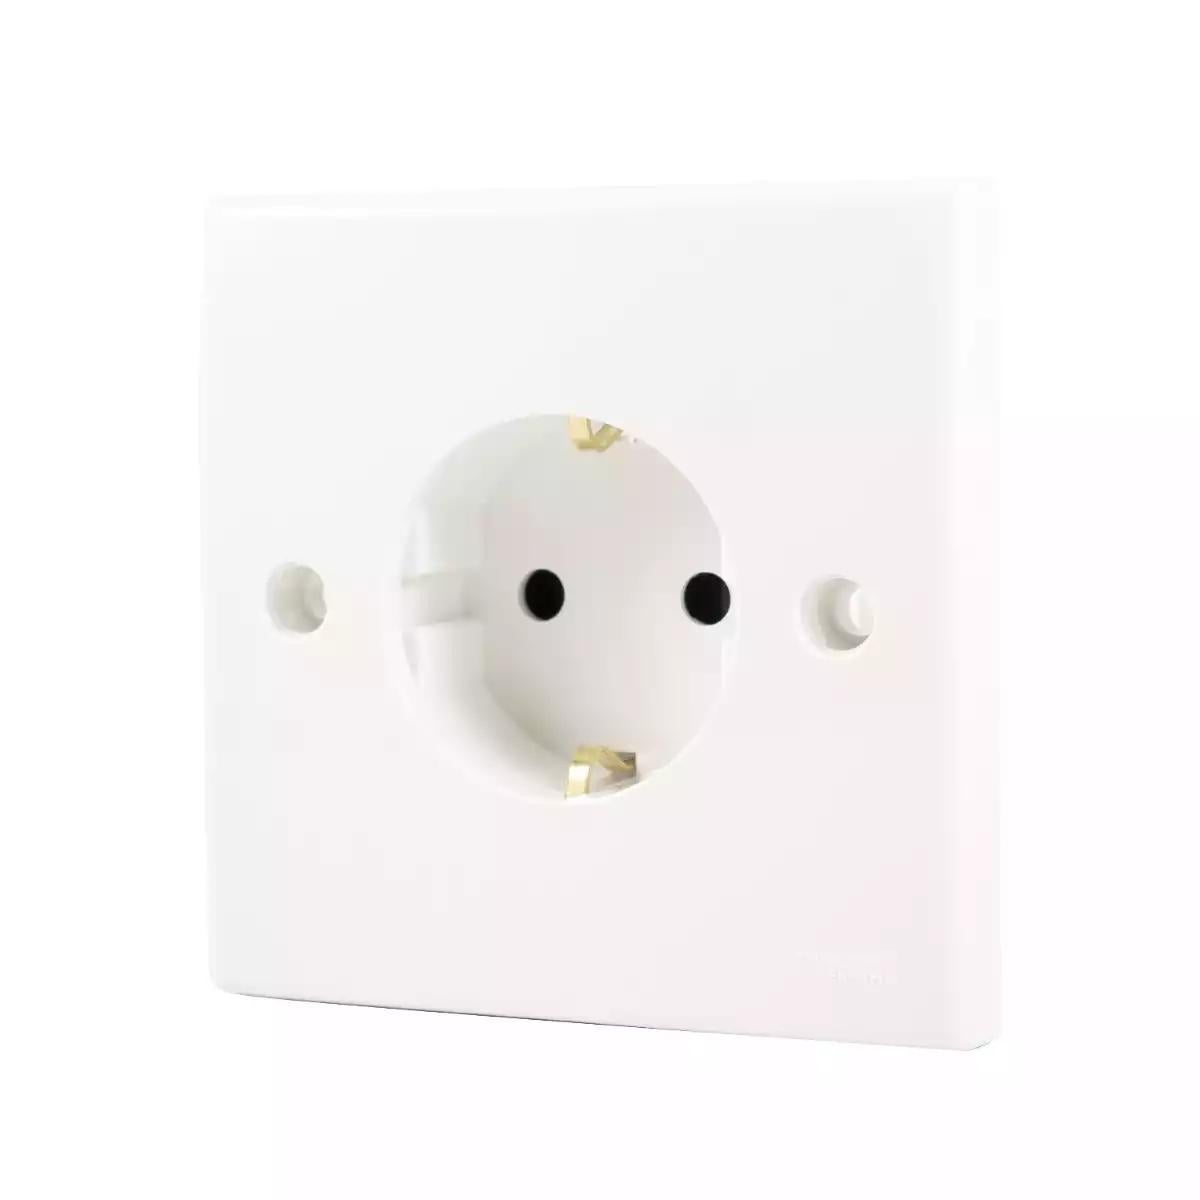 Schneider Electric S-Classic - schuko socket outlet with shutter - 1 gang - white